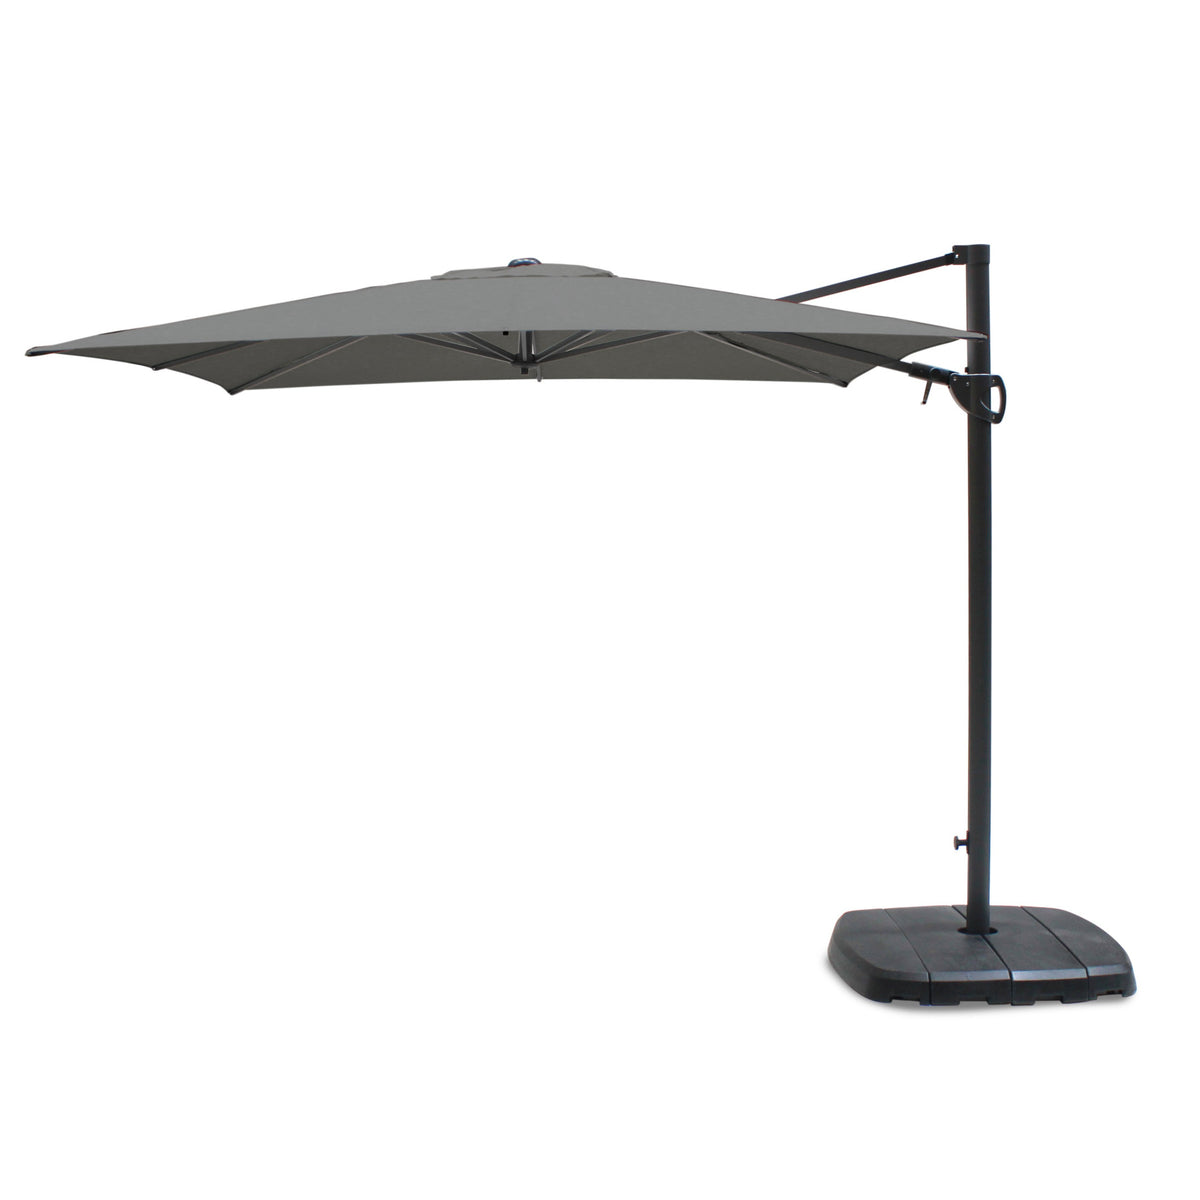 Kettler Slate Grey 2.5m Square Free Arm Cantilever Parasol with Base